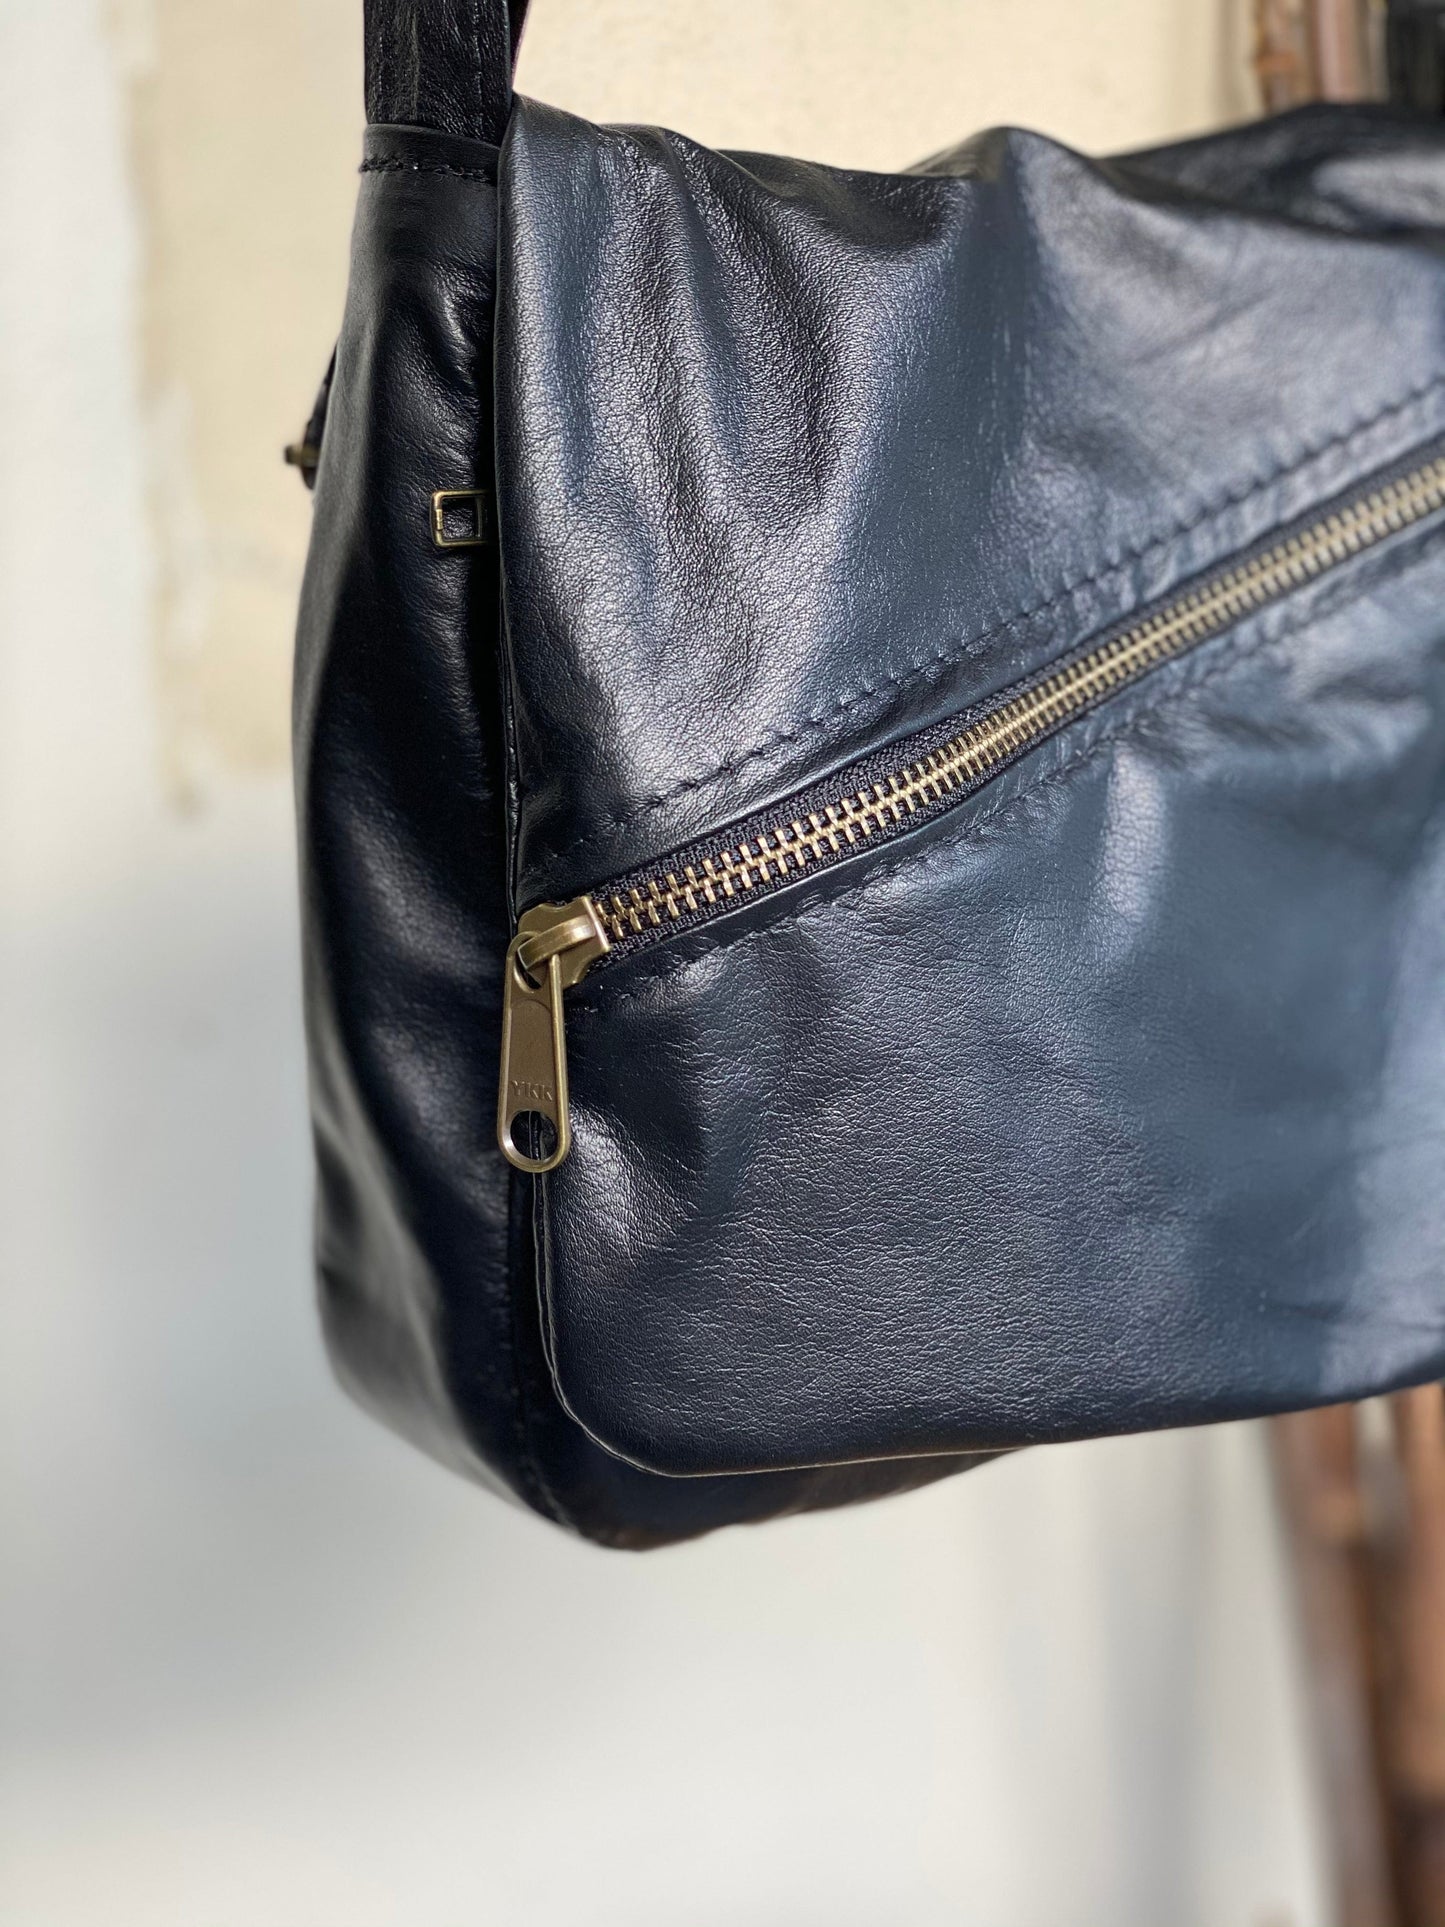 The Real McCaul Shoulder Bags Universal Satchel Bag- Extra Small Australian Made Australian Owned Leather Satchel Bag- Australian Made in Kangaroo and Cowhide Leather